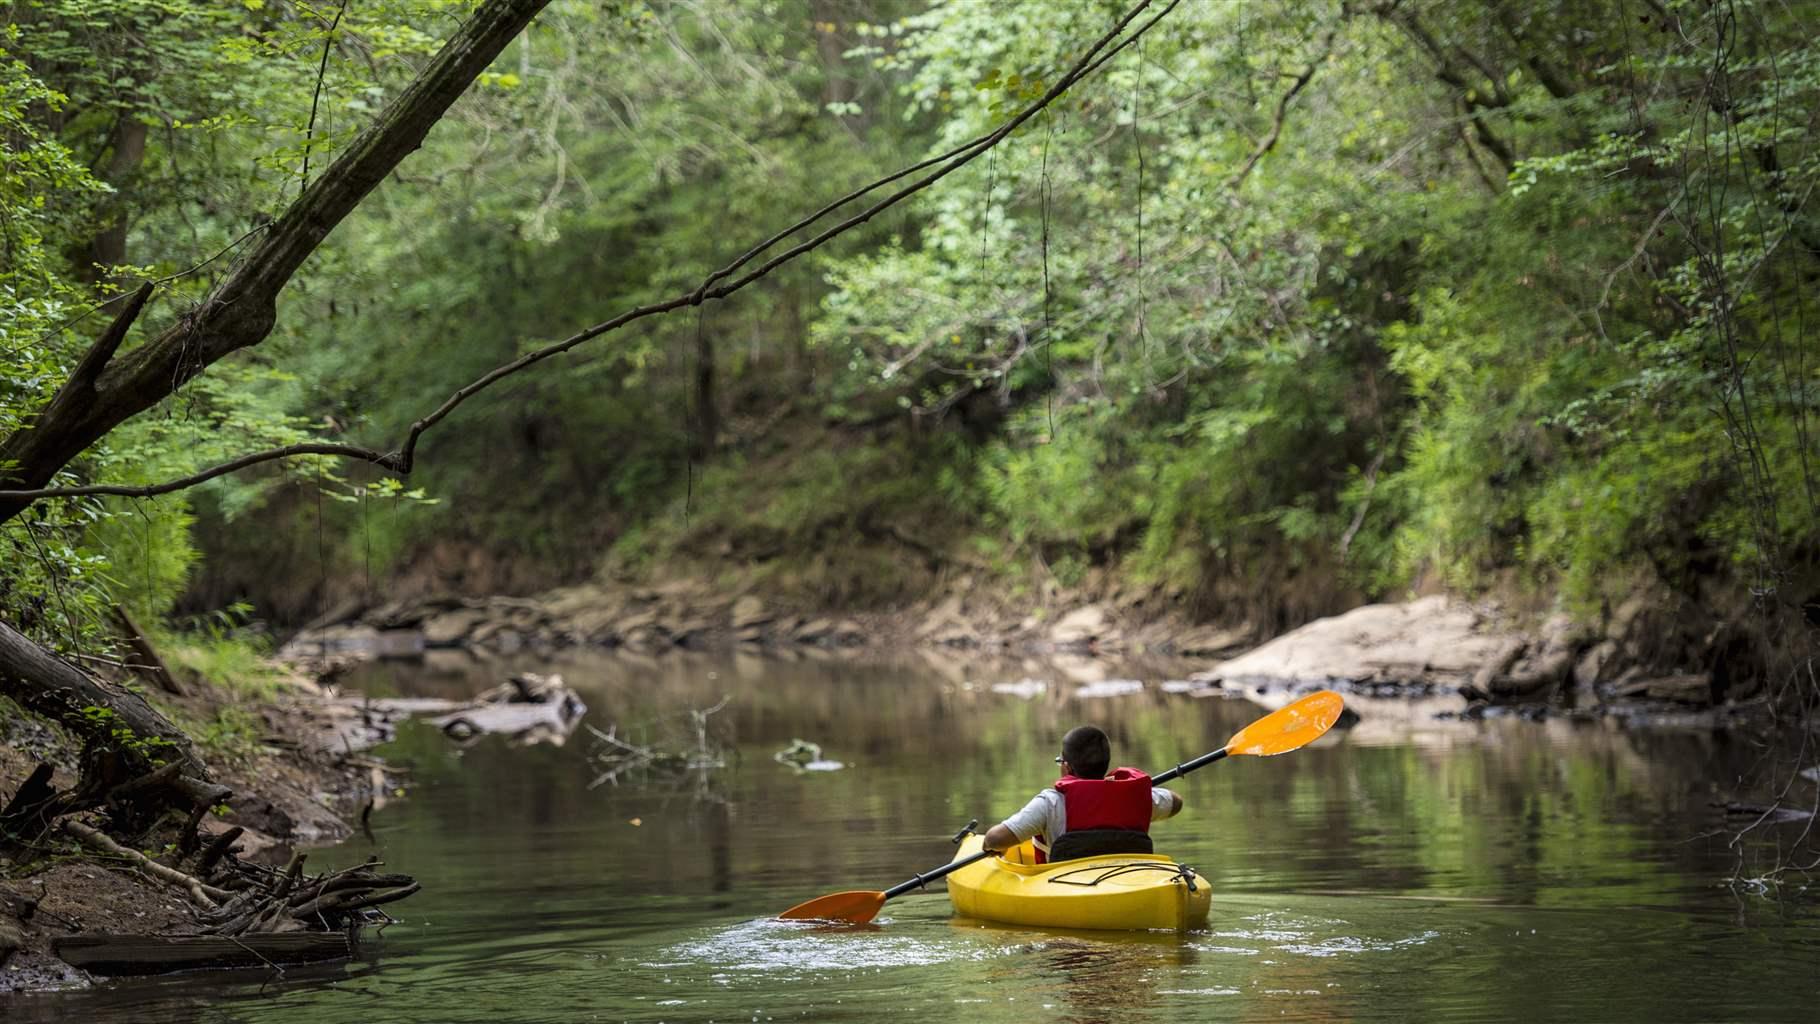 A young boy kayaks in a narrow river lined with trees on both sides. 